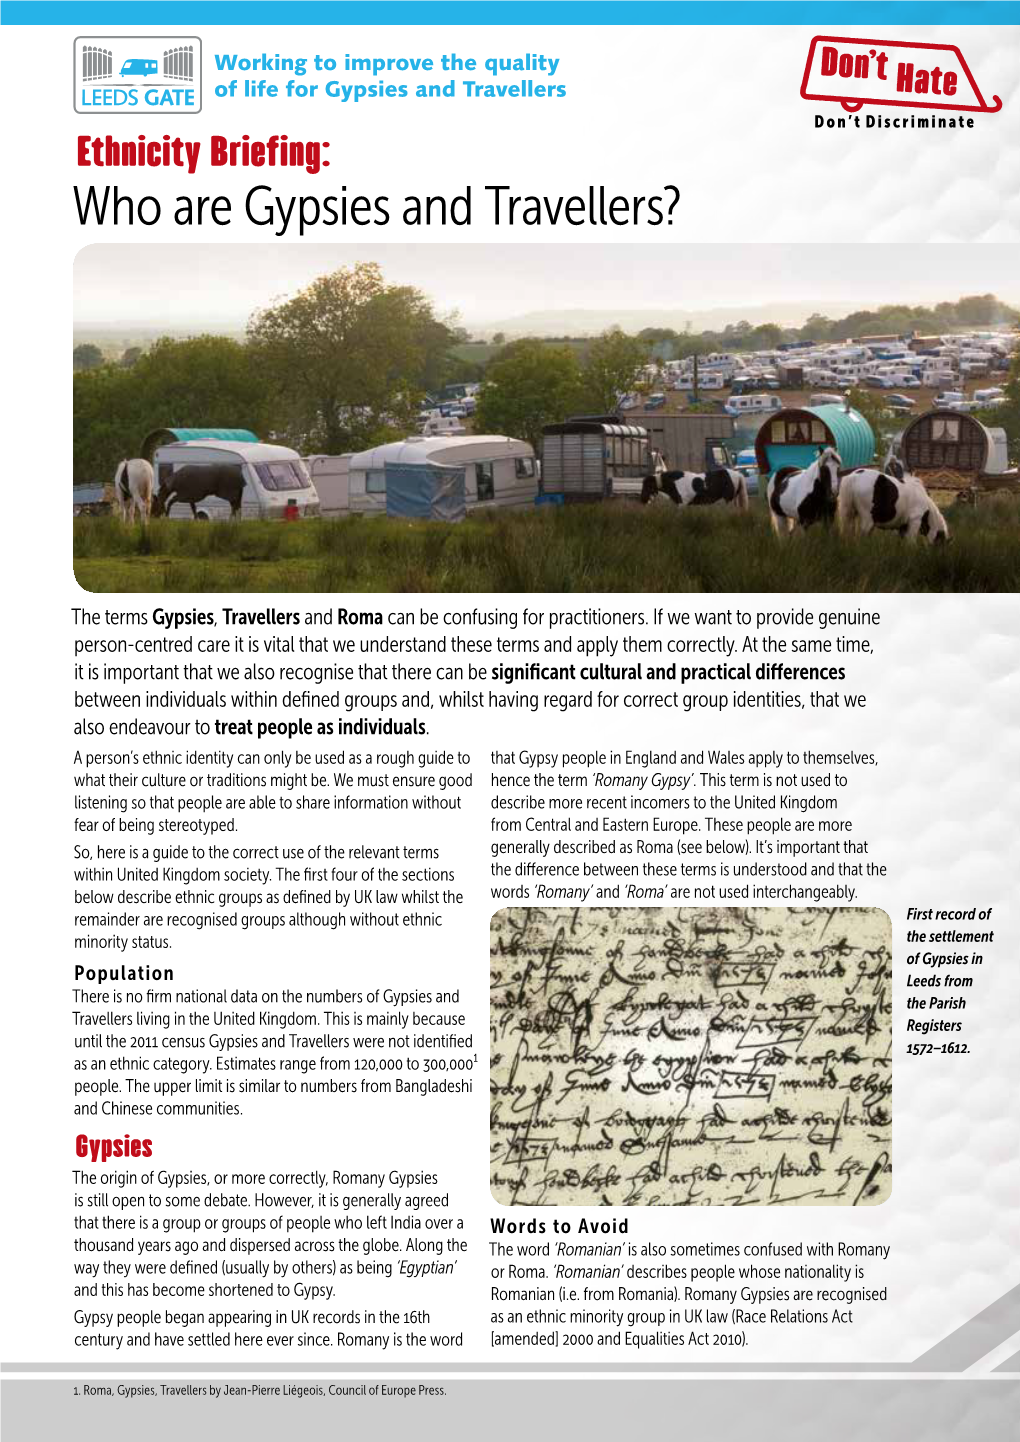 Who Are Gypsies and Travellers?